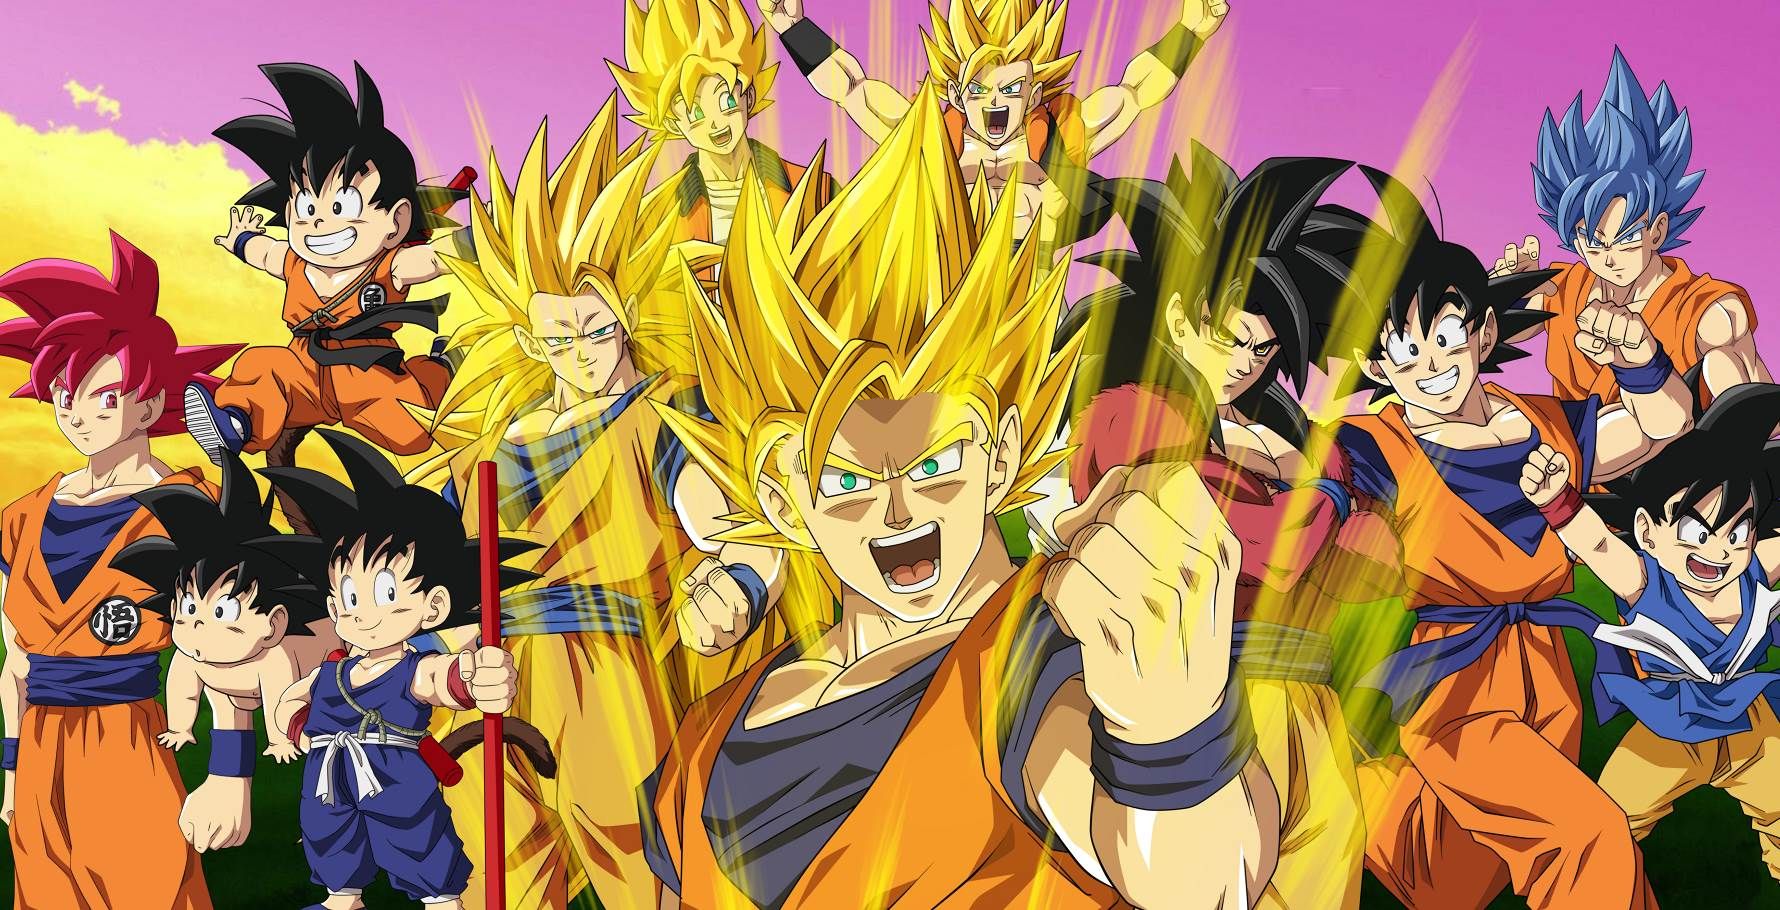 Eight Things They Changed From DBZ To Dragon Ball Super (And Two They Kept The Same)